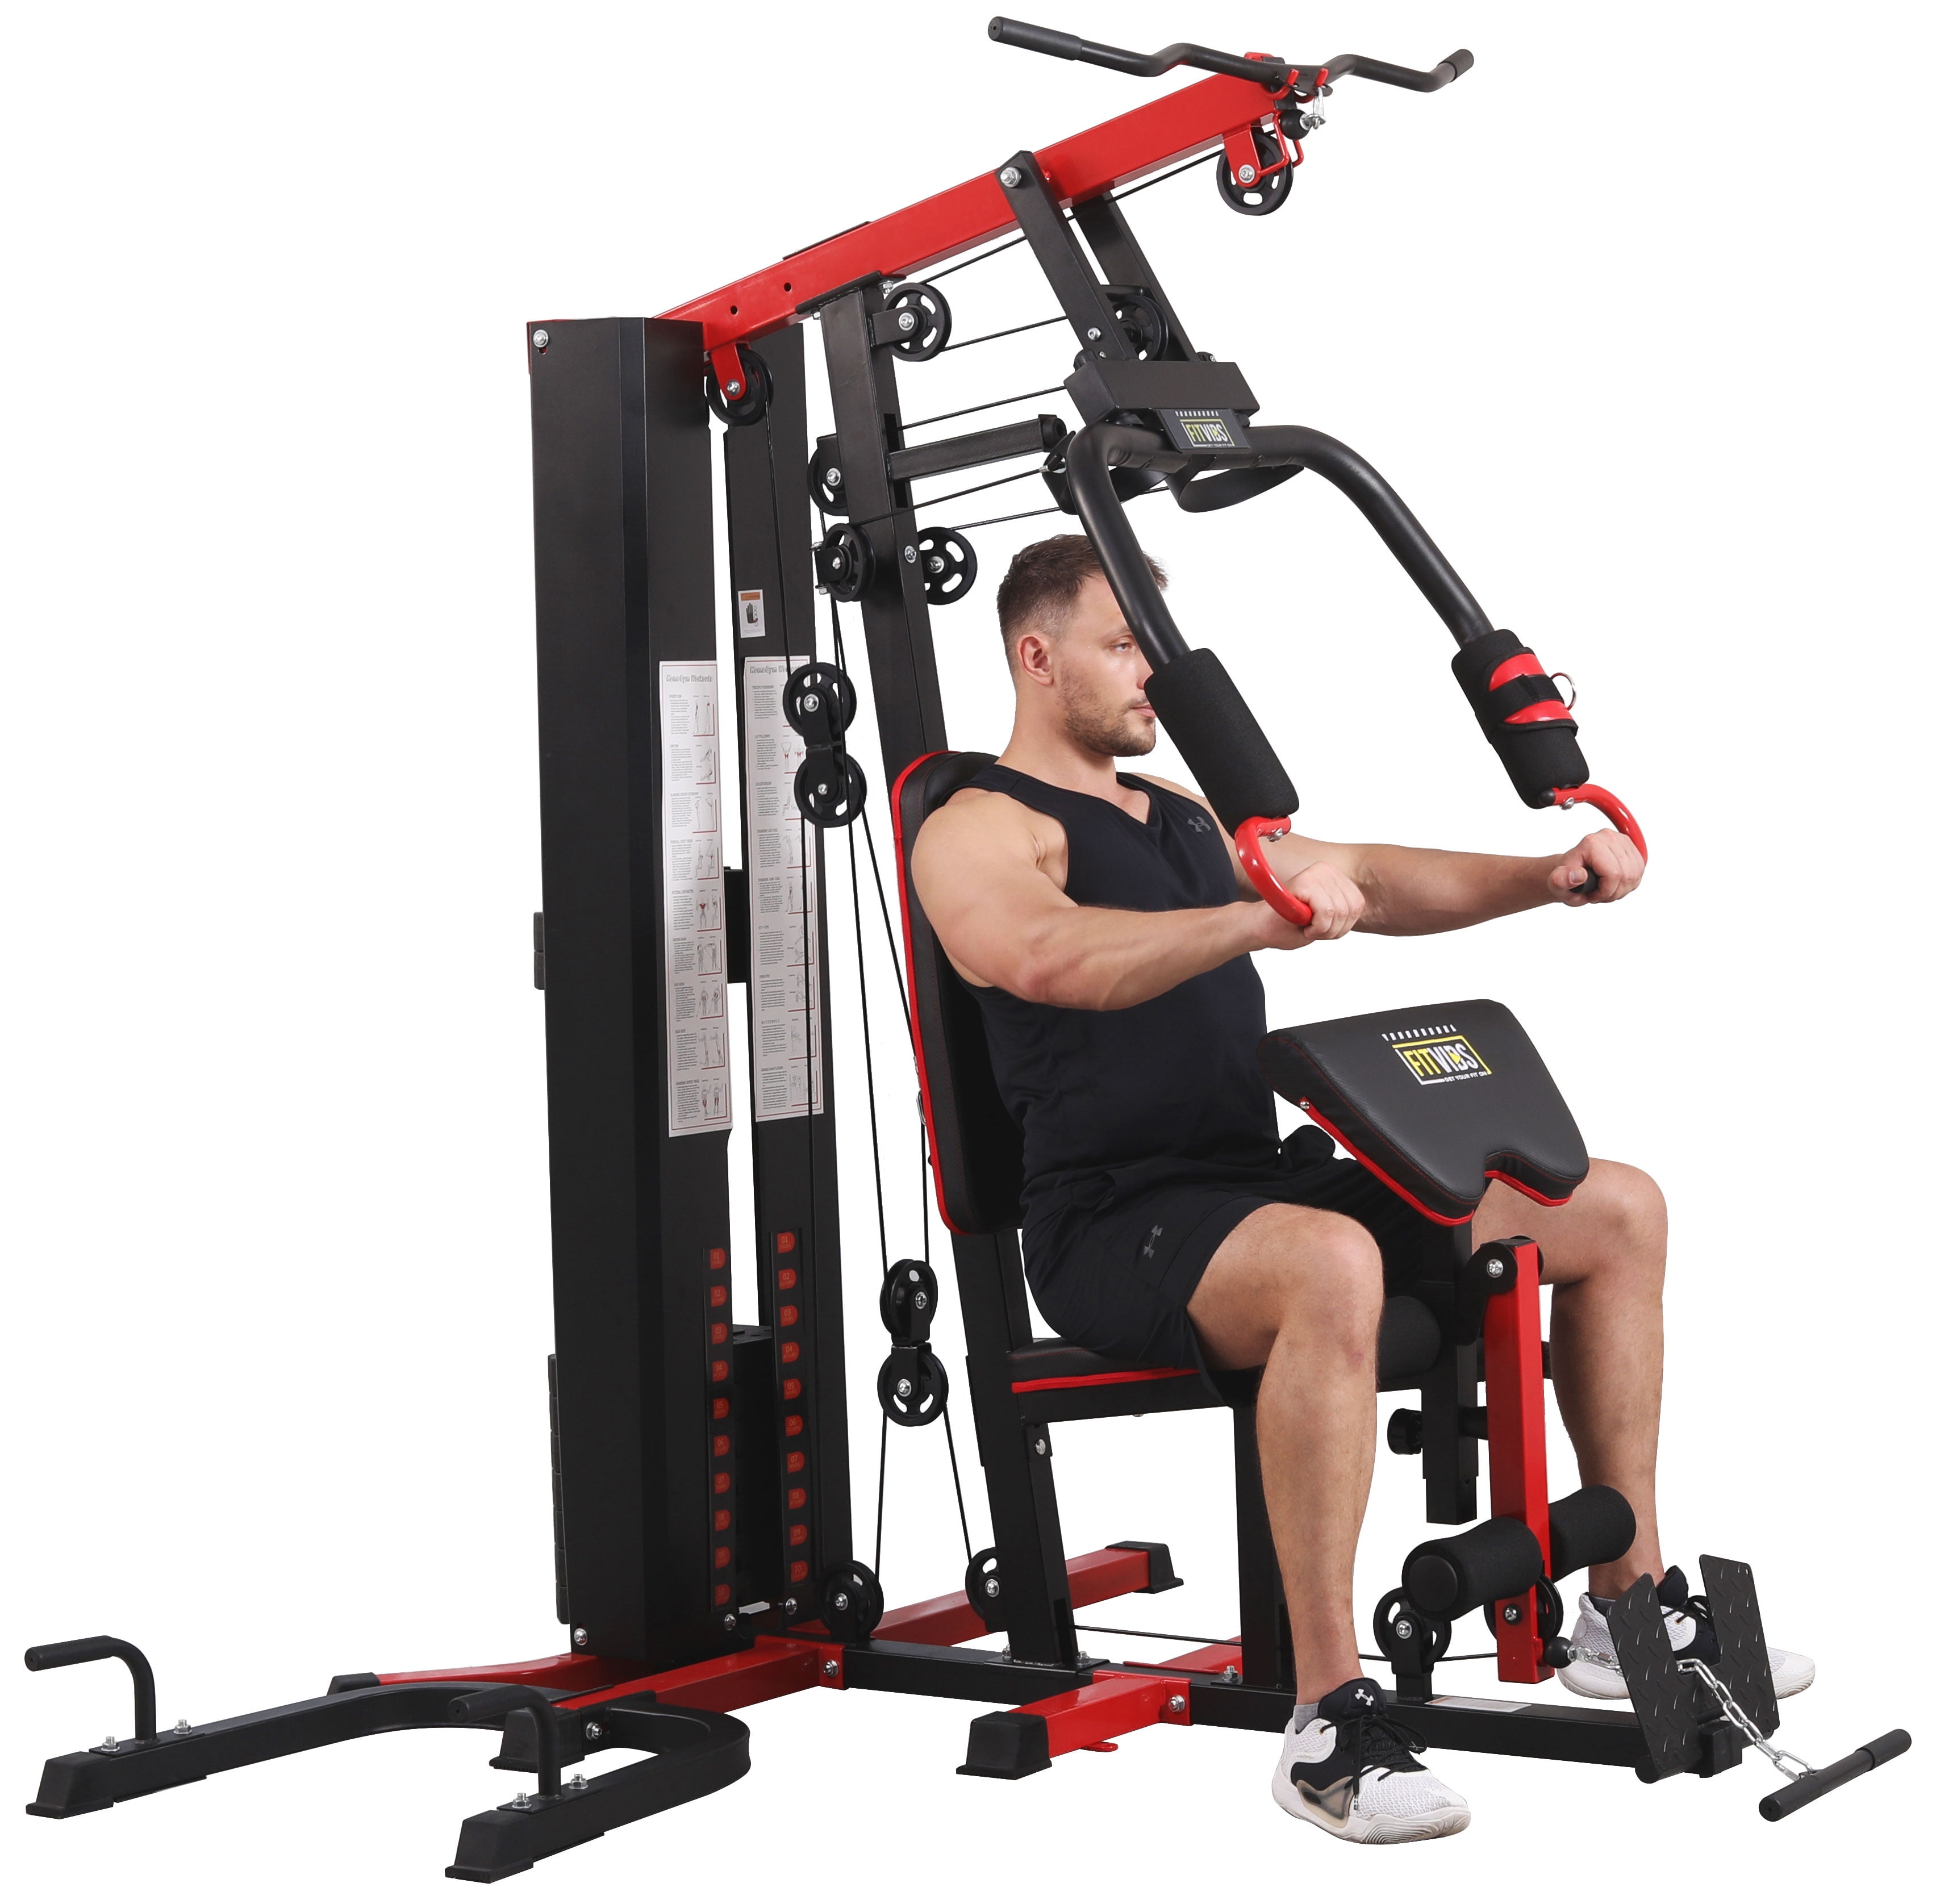 Fitvids LX800 Home Gym System Workout Station with 330 Lbs of 122.5 Lbs Weight Stack, Two Station, Comes with Installation Instruction Video, Ships in 6 Boxes Walmart.com